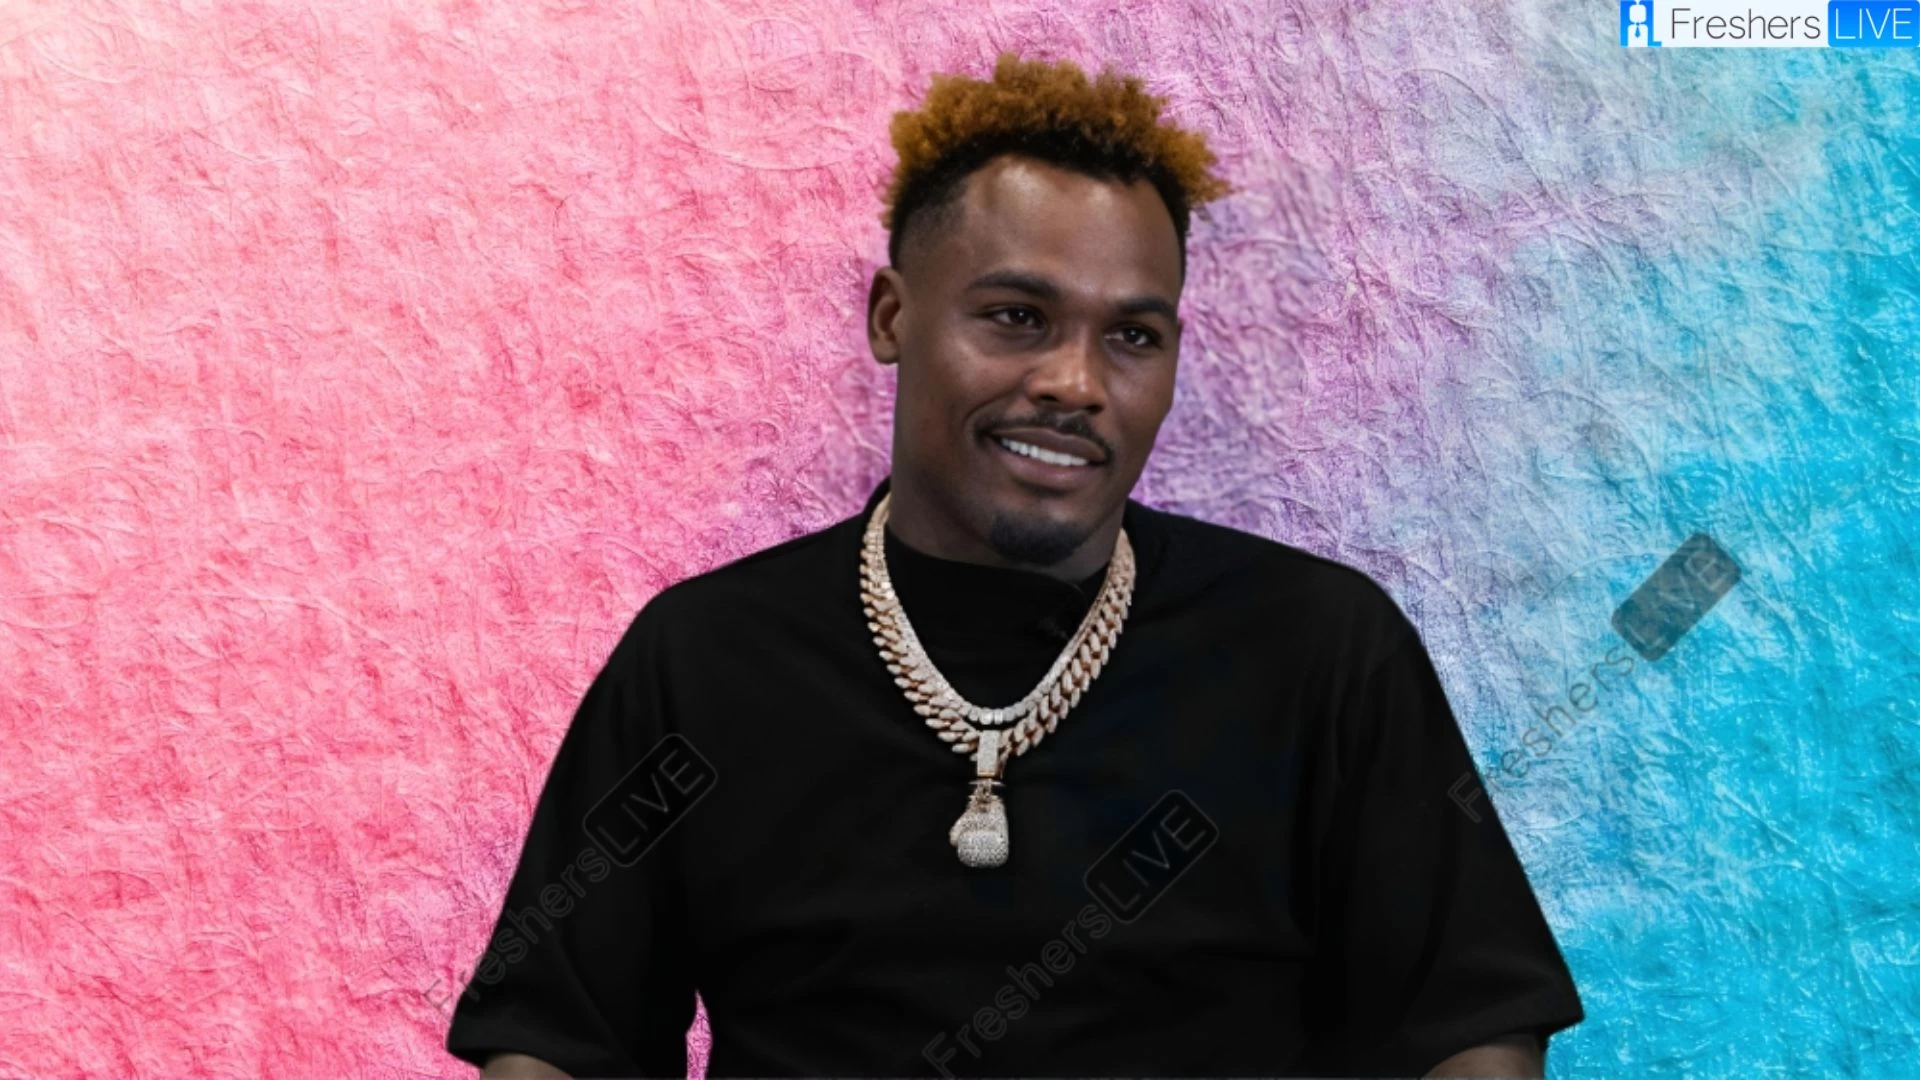 Jermell Charlo Religion What Religion is Jermell Charlo? Is Jermell Charlo a Christian?